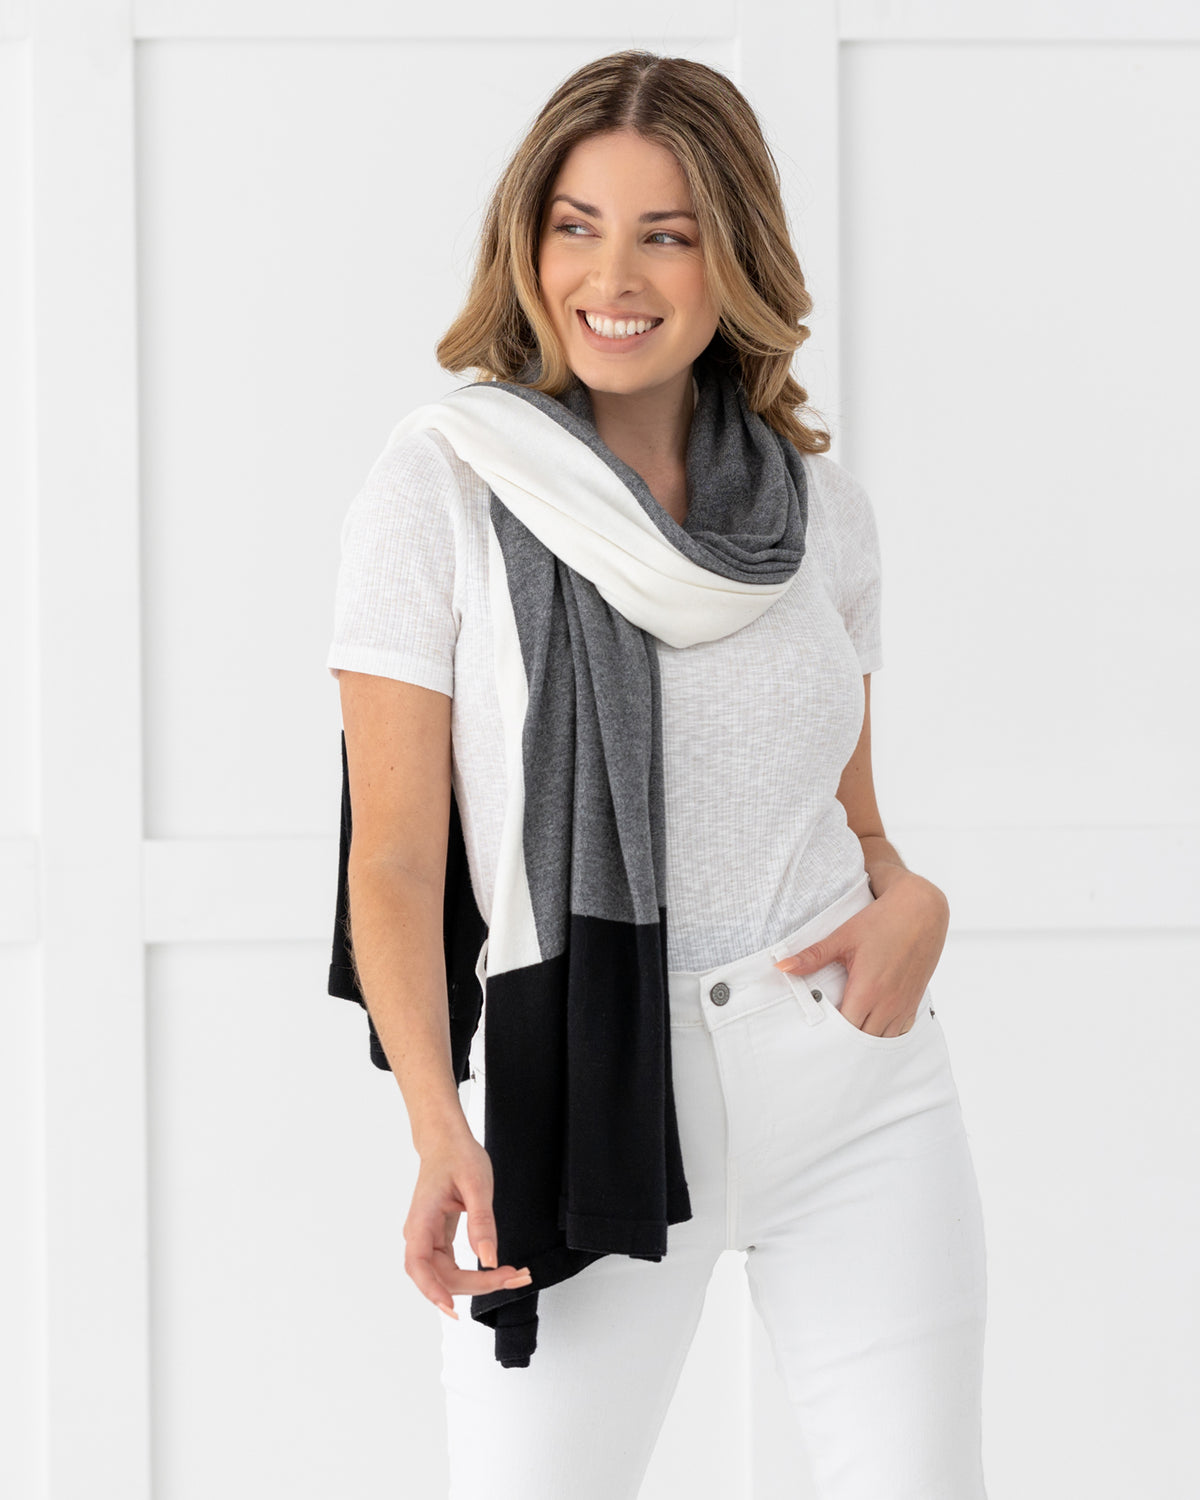 Woman wearing the Dreamsoft Travel Scarf in Gray Colorblock which is a black, gray and cream scarf,  smiling with one hand in her pant pocket